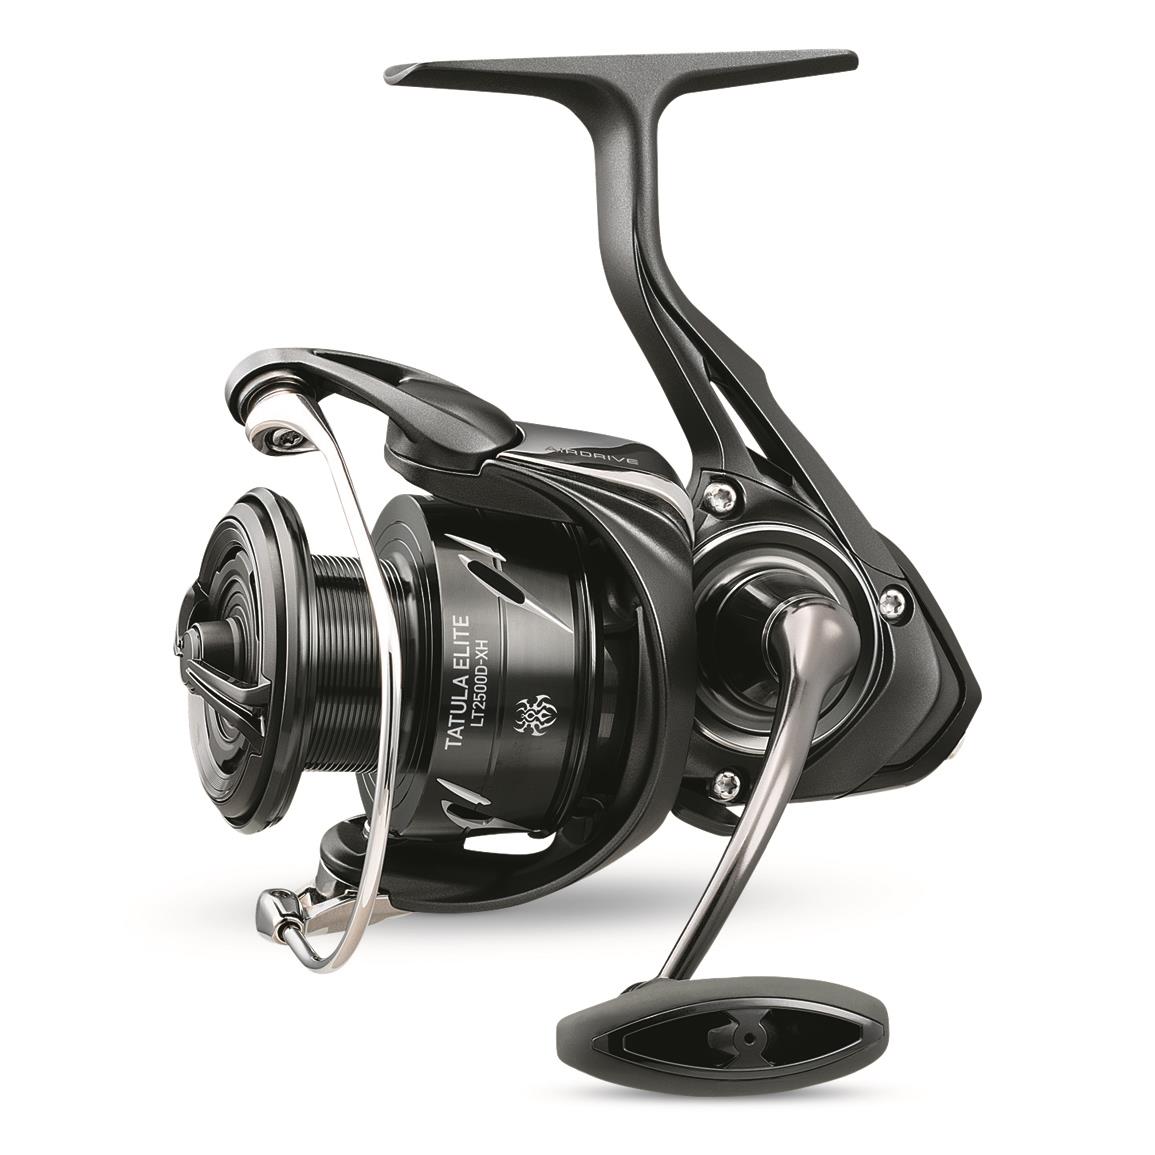 Daiwa Crosscast Reel, THIS. REEL. COSTS. JUST. £125! 😍